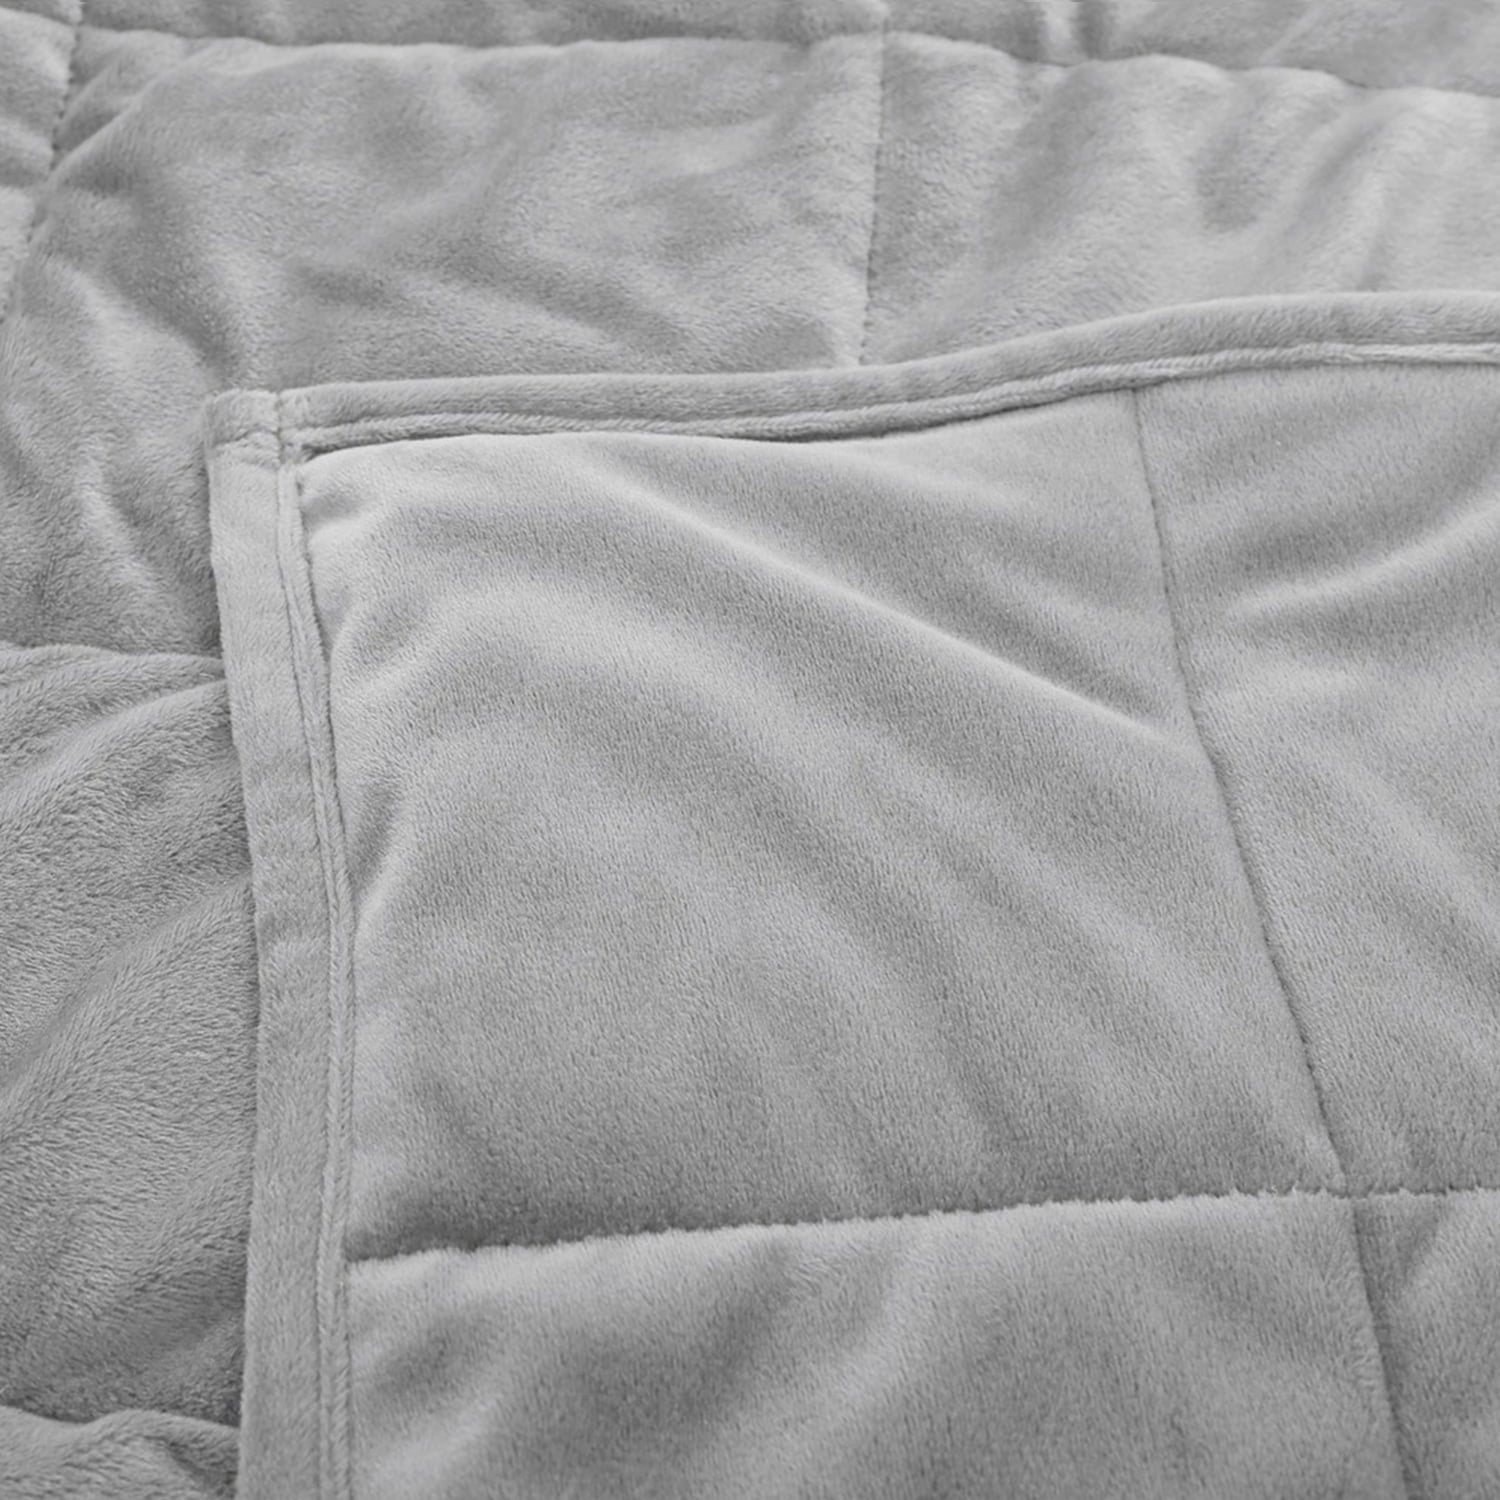 Sedona House 15lb Silky Velvet Weighted Blanket, Reversible & Machine Washable blanket, Grey Color 48X72 Twin Size